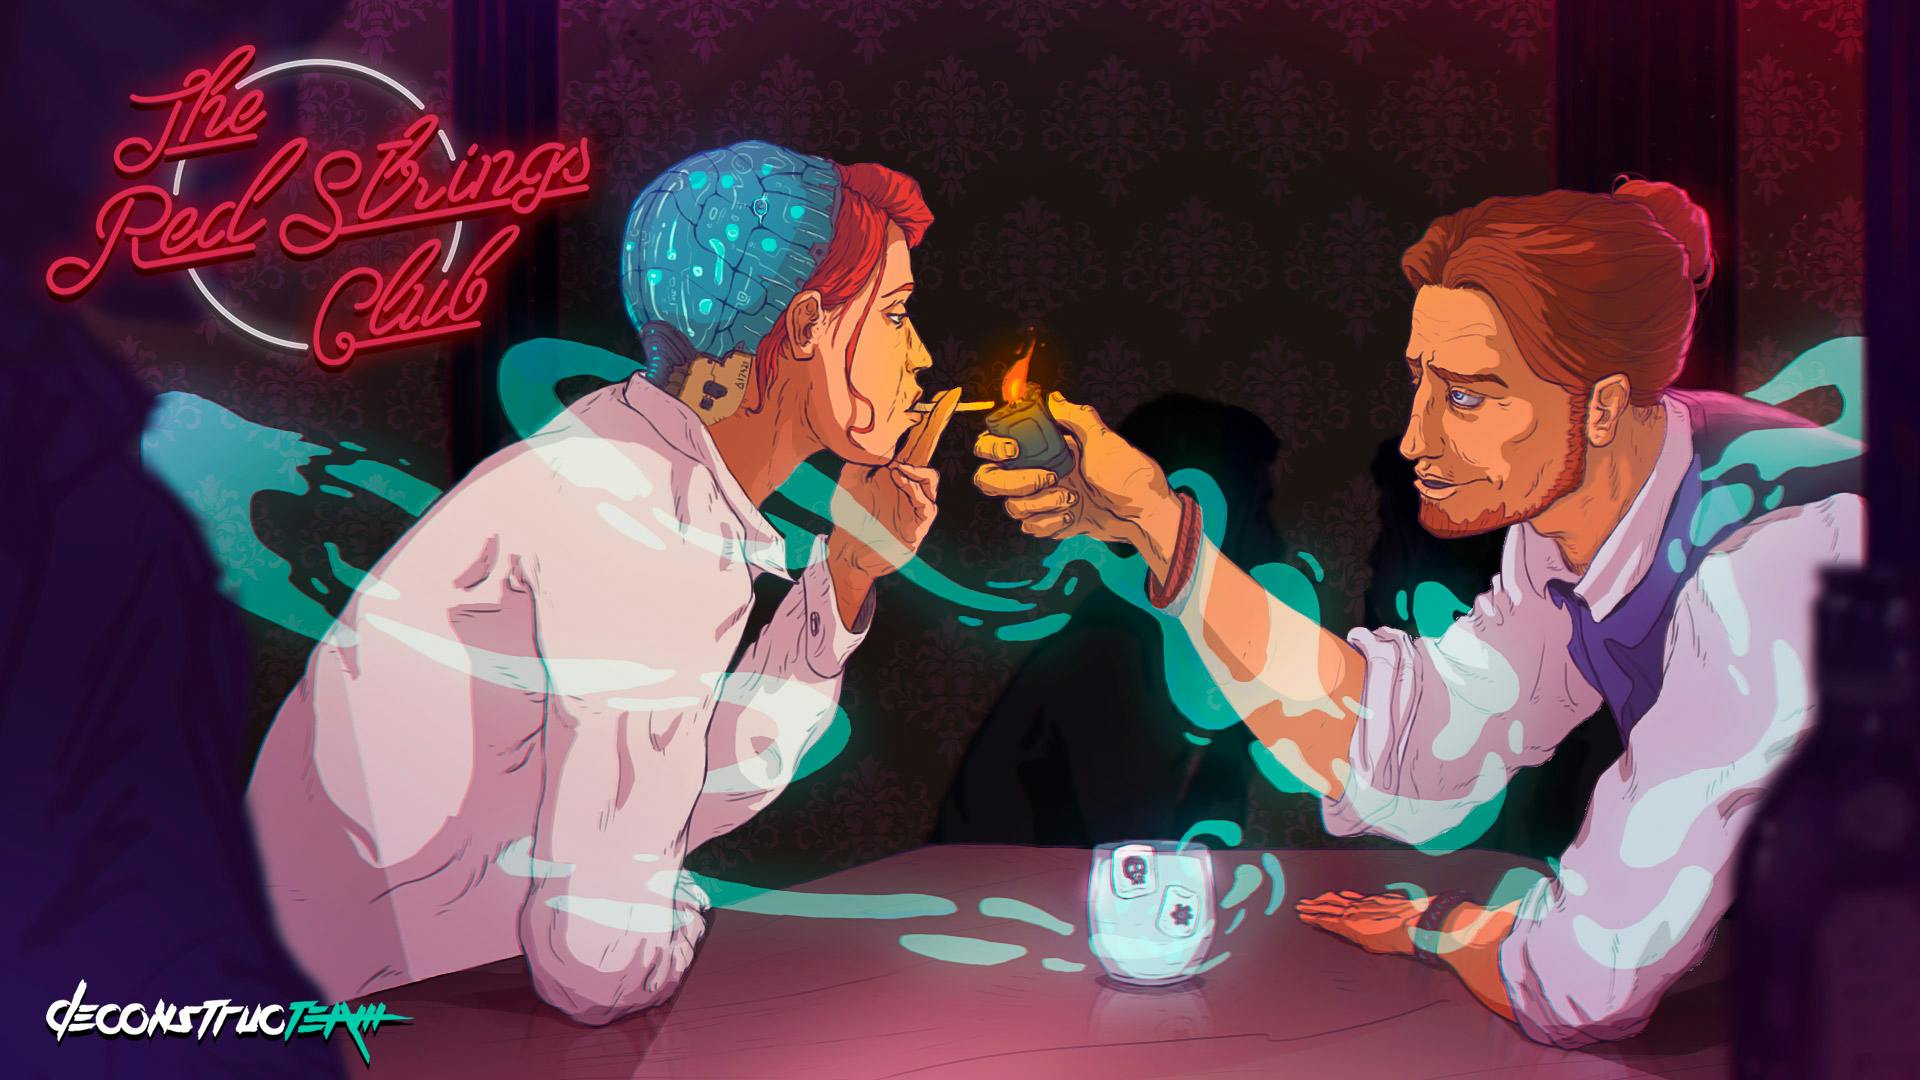 Key art created for the video game The Red Strings Club by Deconstructeam showing a person lighting another person's cigarette.